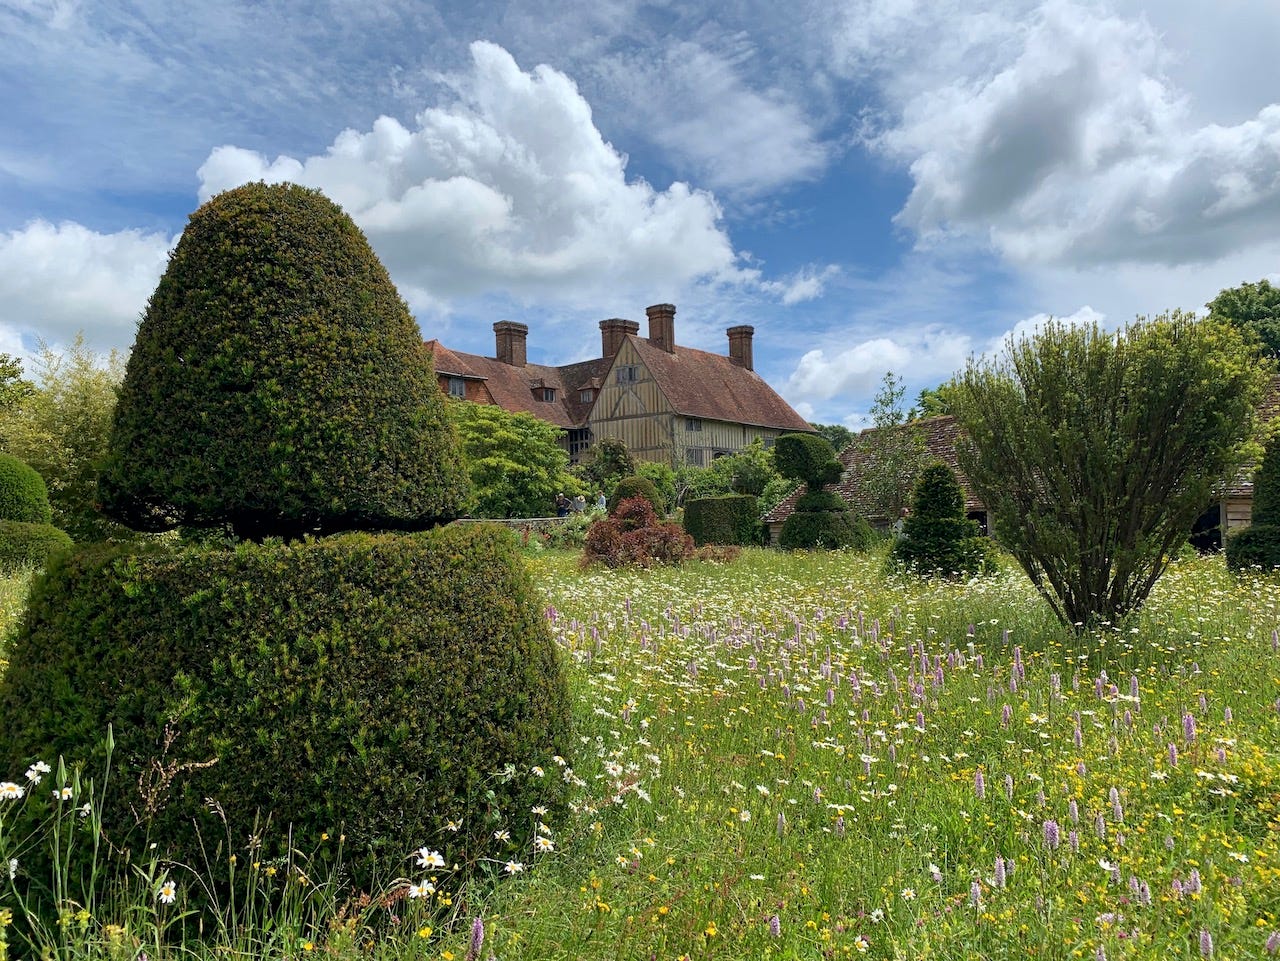 Topiary Lawn at Dixter. Photo by Marcy Hawley